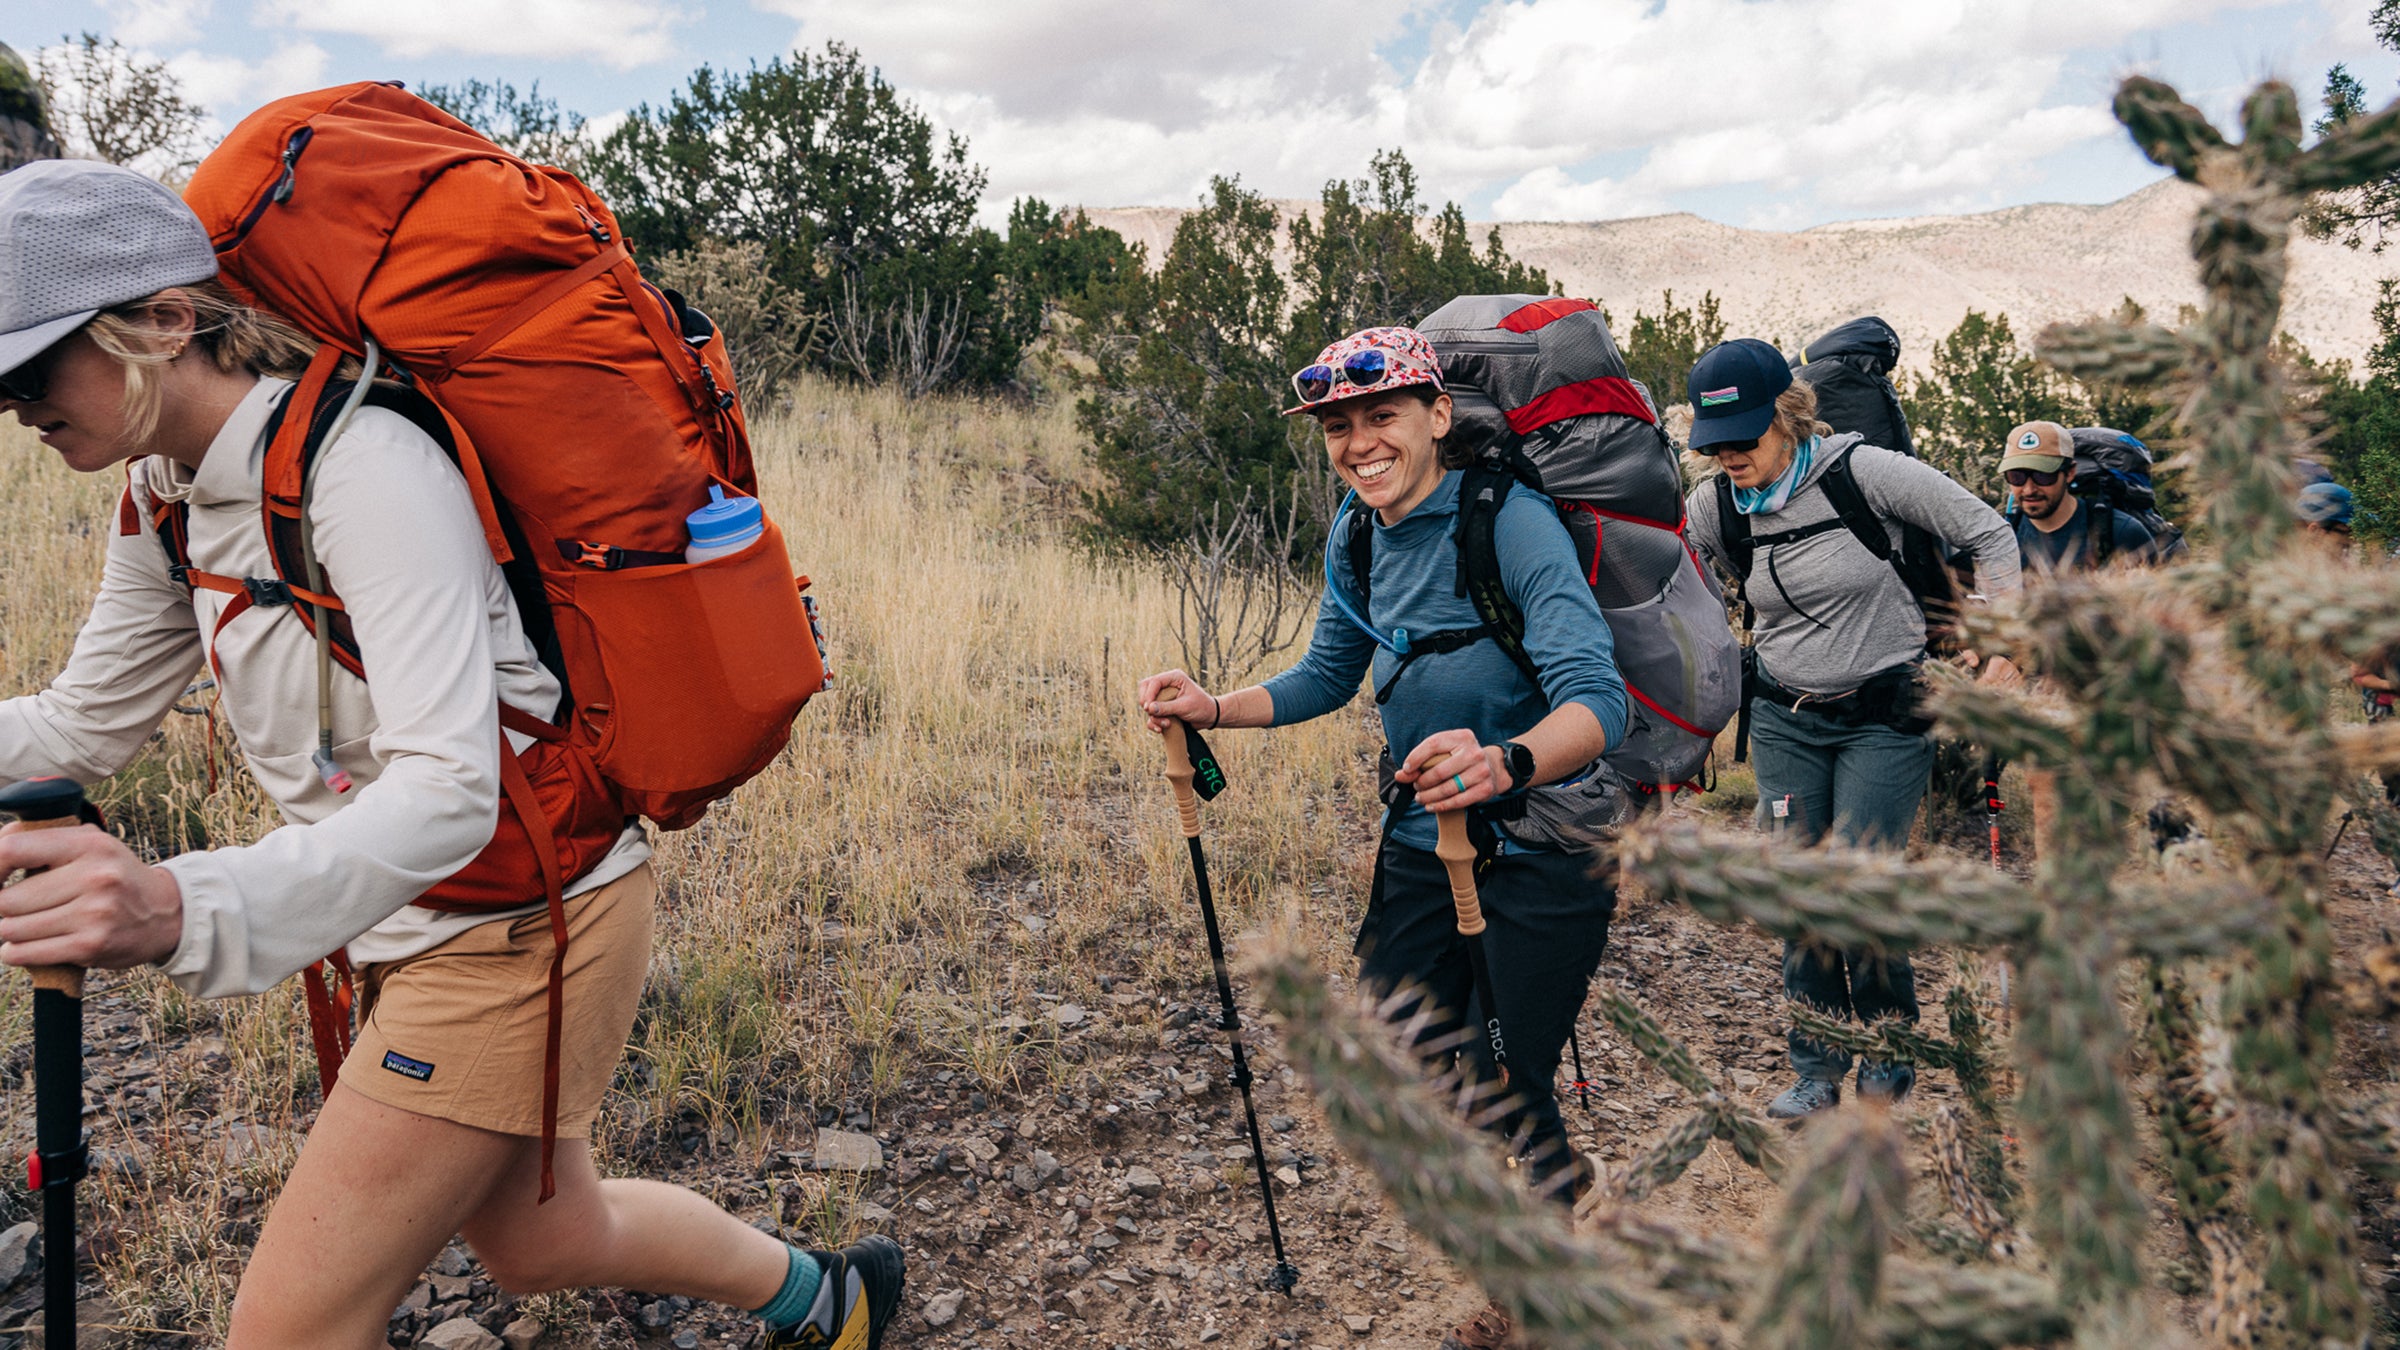 Best walking and hiking gear: Hiking boots, walking sticks and more